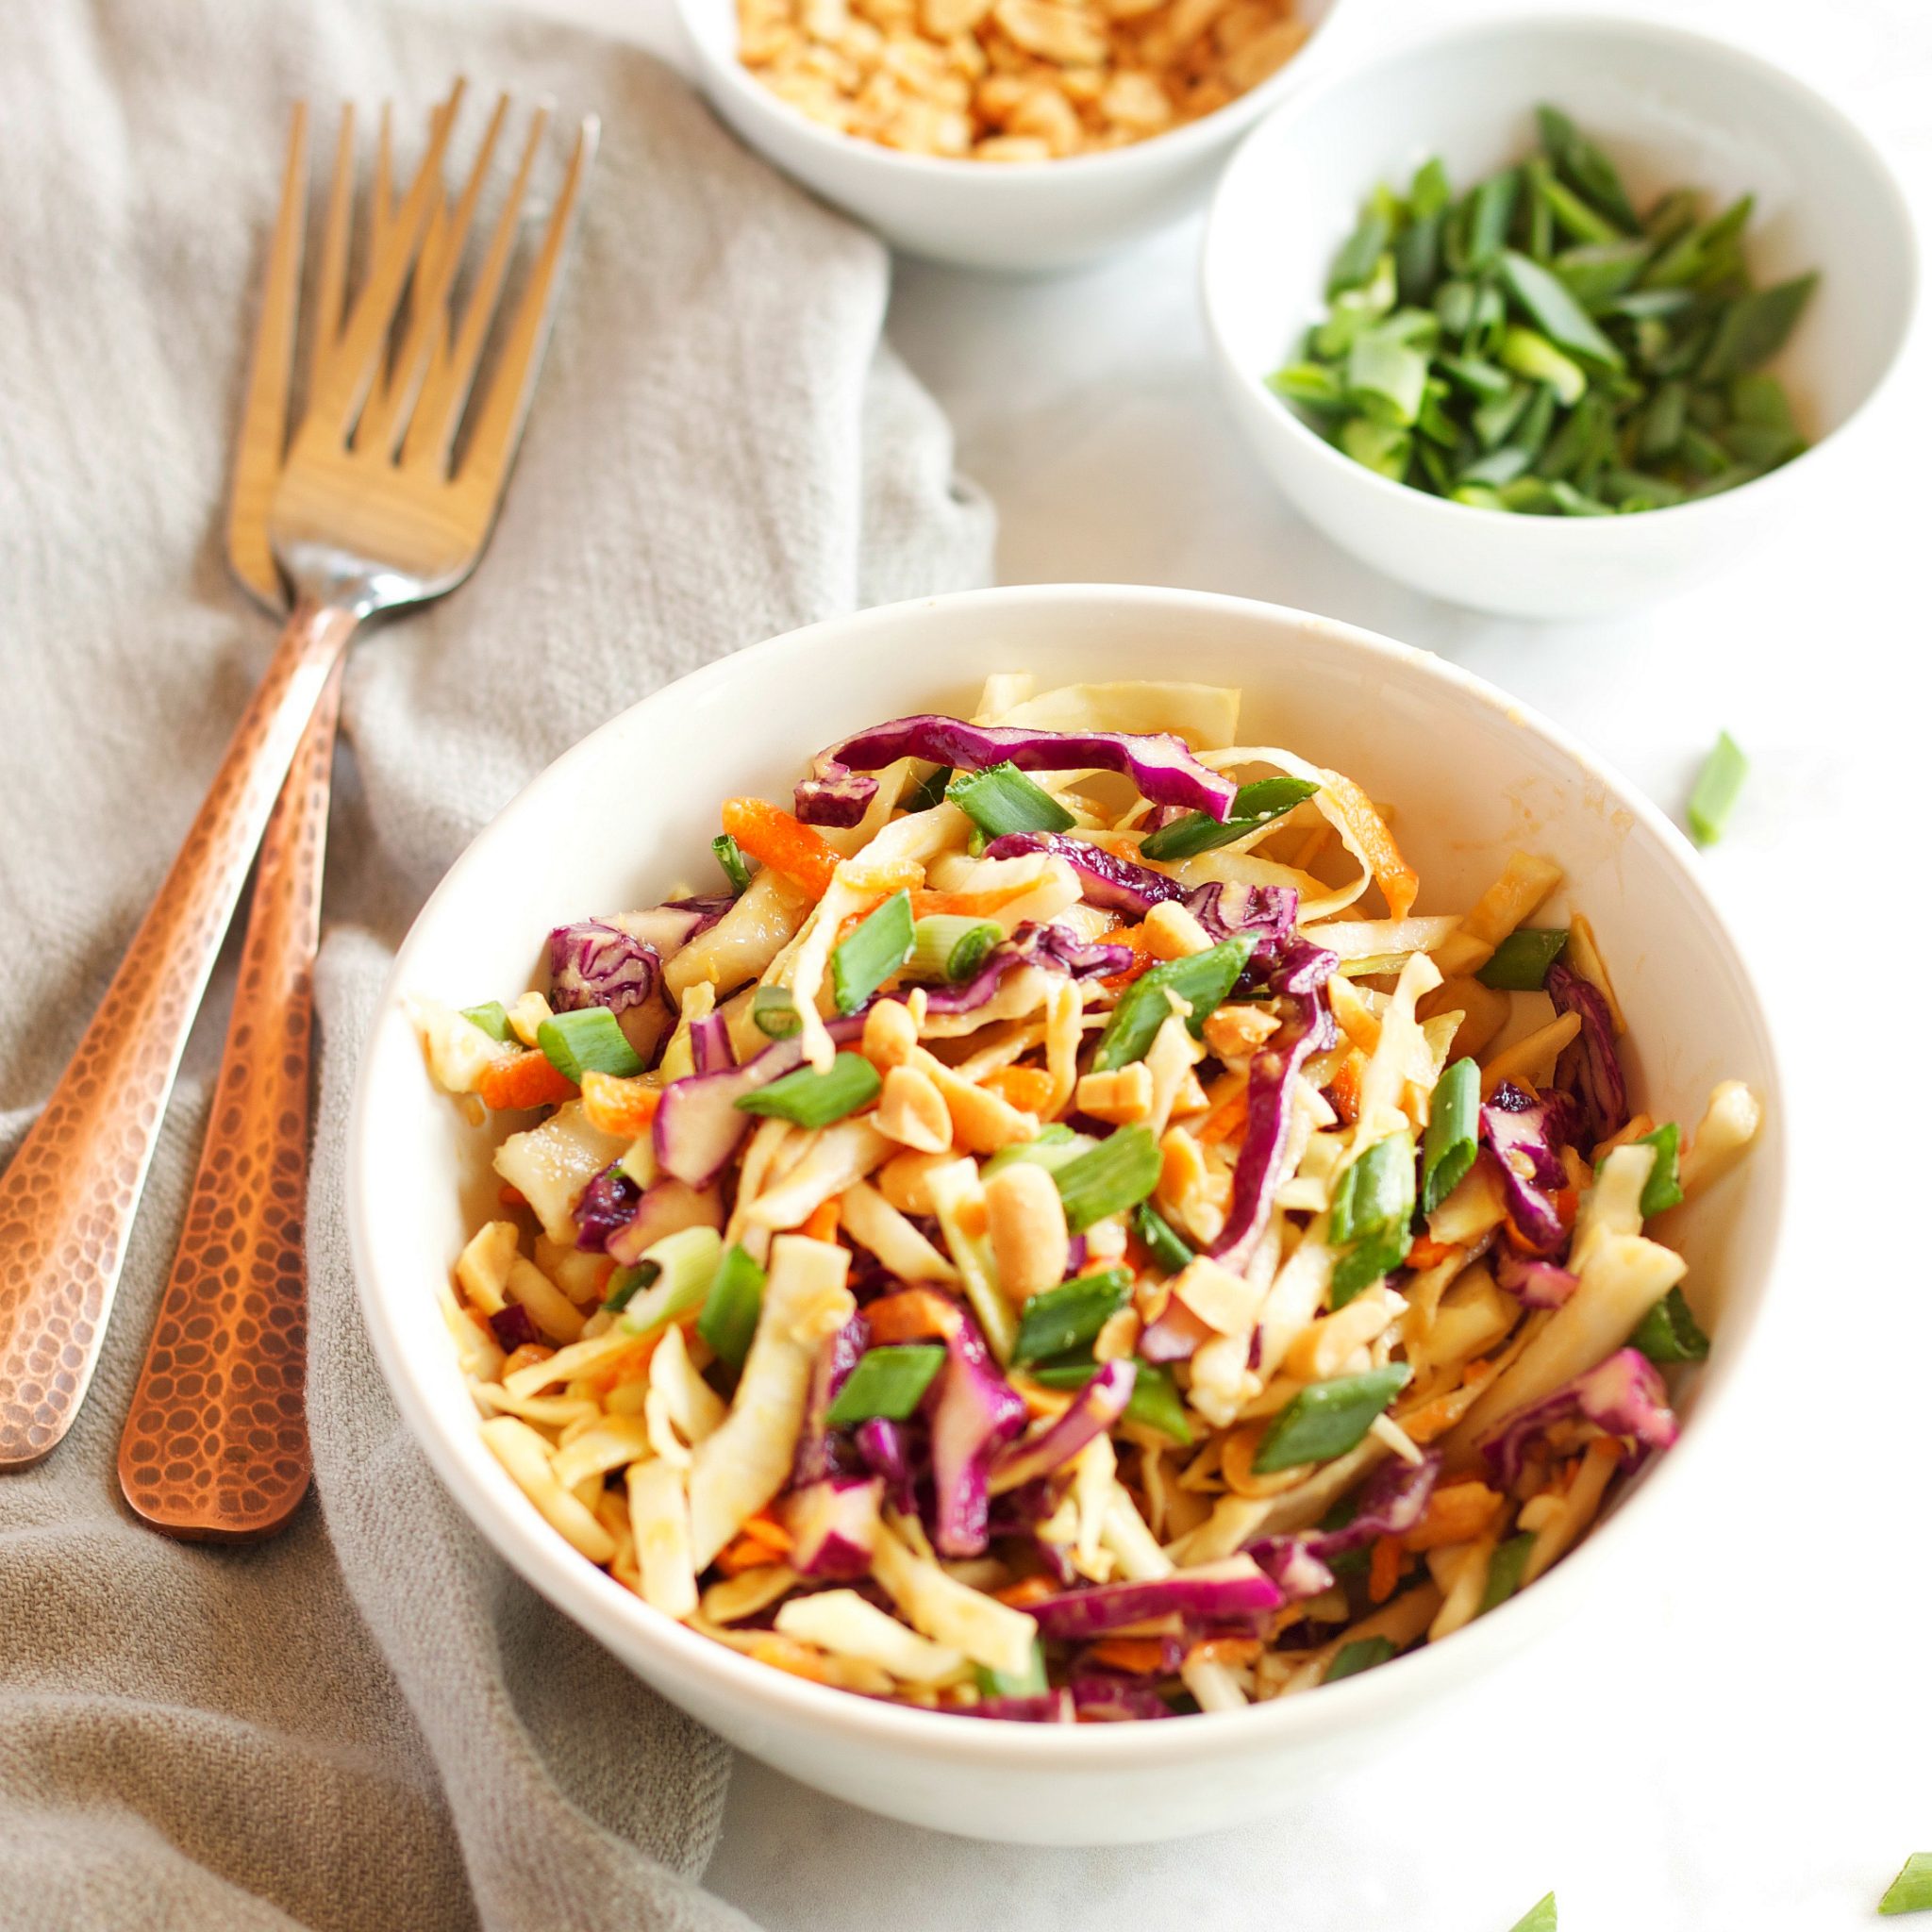 This Asian Cabbage Salad with Ginger Peanut Dressing is a delicious and light Thai-inspired side dish! Recipe from thebusybaker.ca!